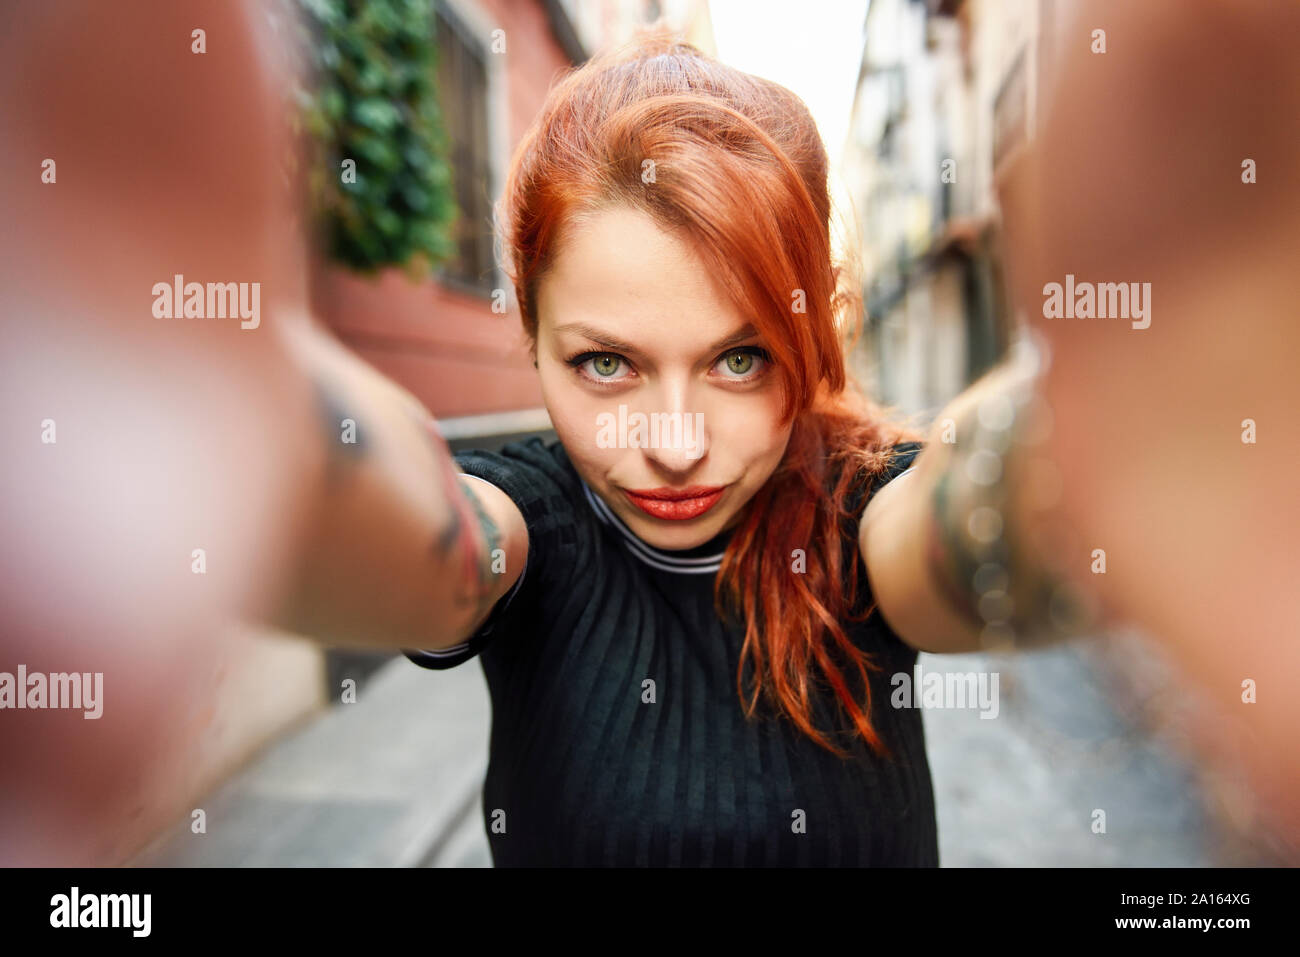 Selfie portrait of red-haired woman in the city Stock Photo